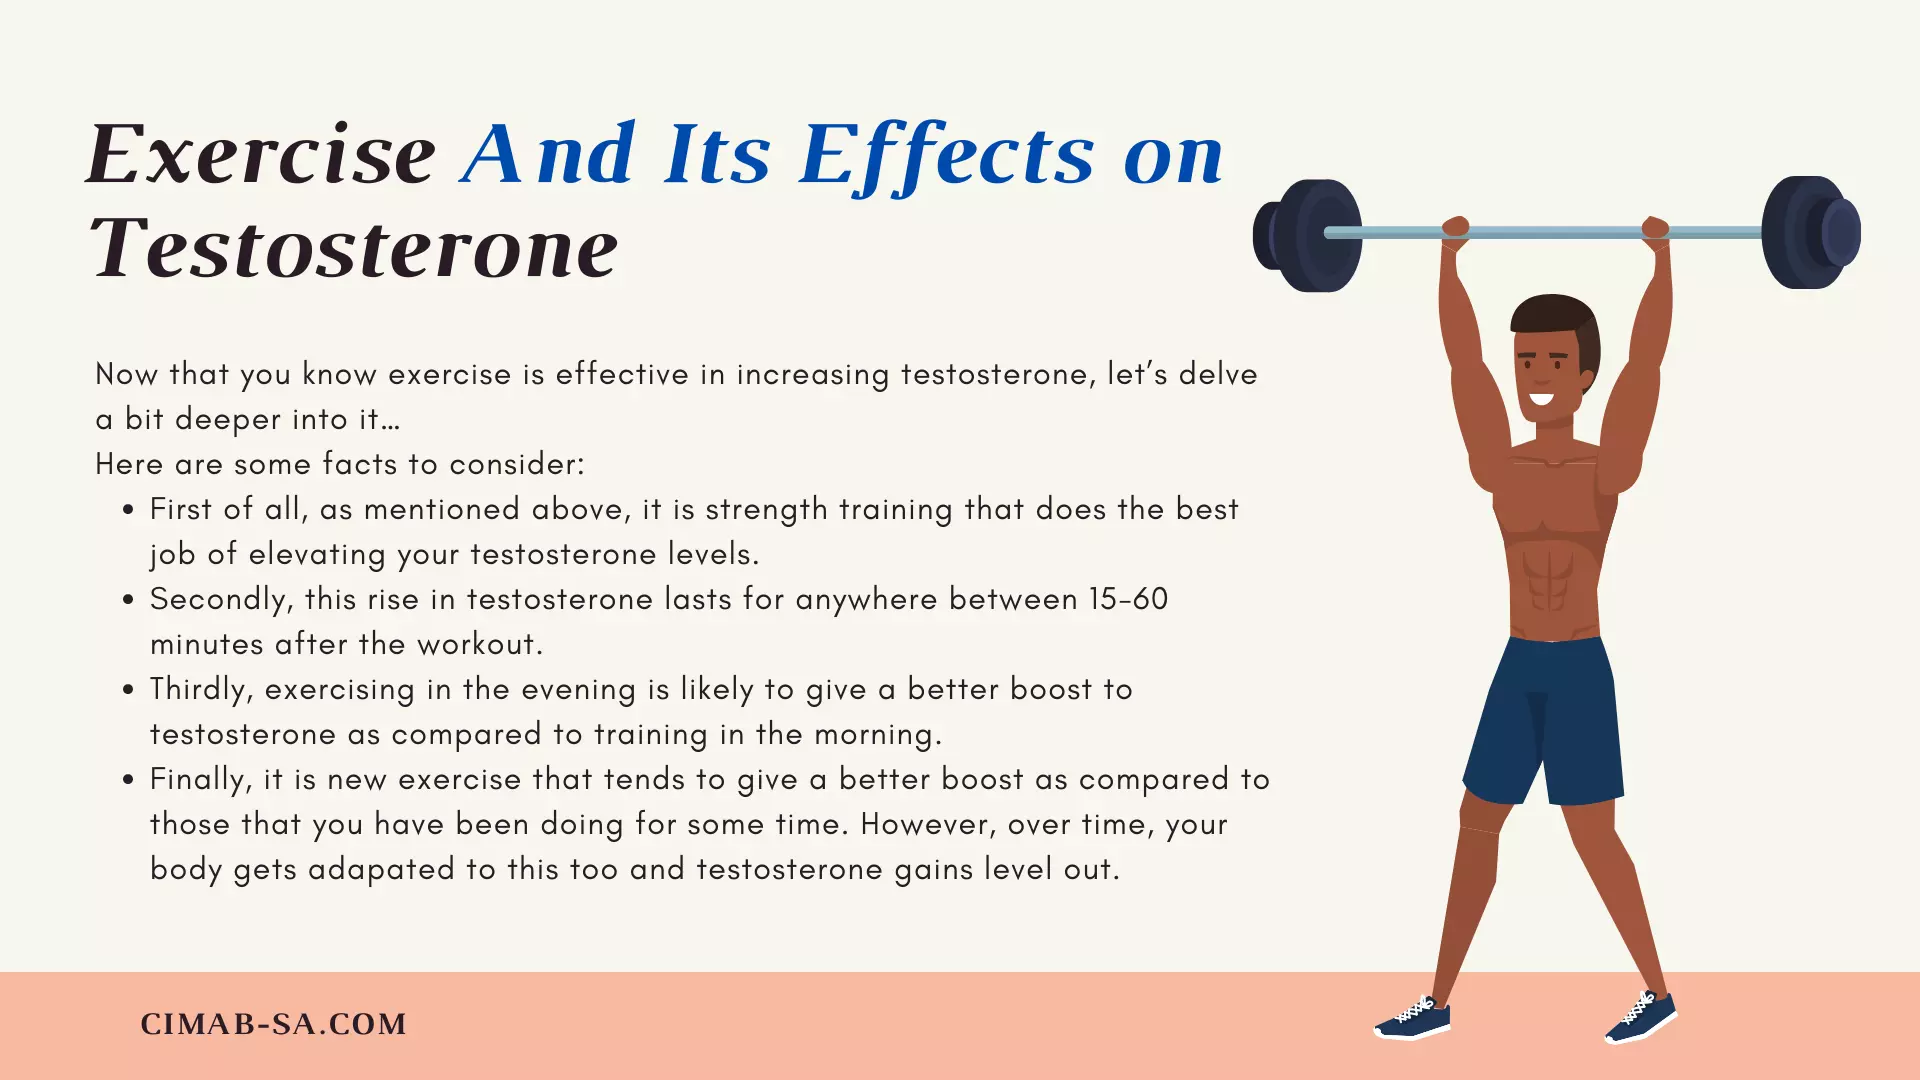 Does Exercise Increase Testosterone